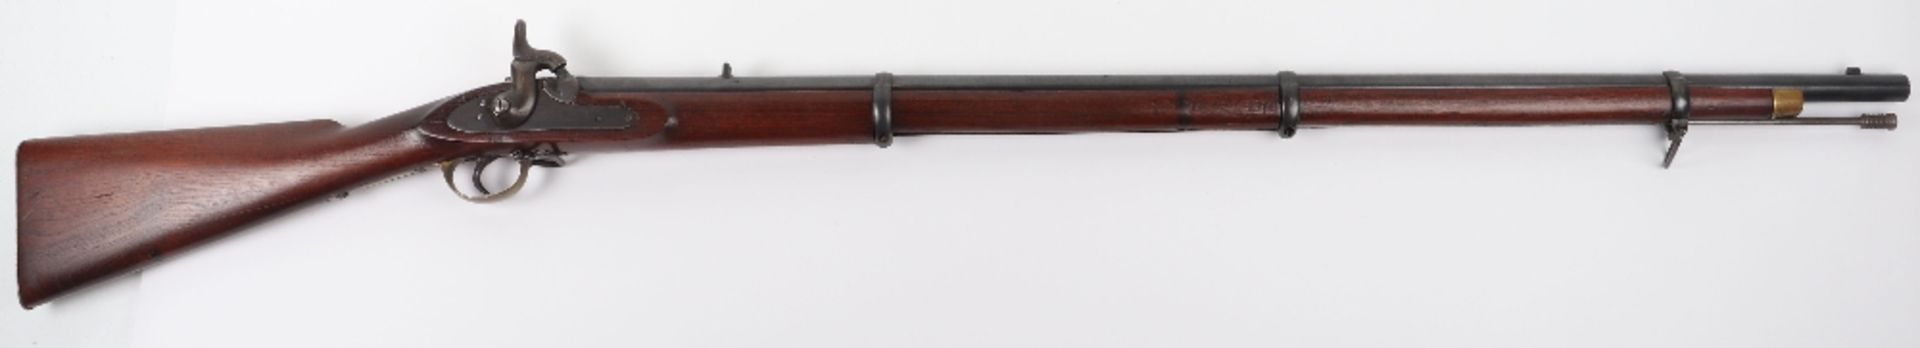 14 Bore Indian Military Style Percussion Musket